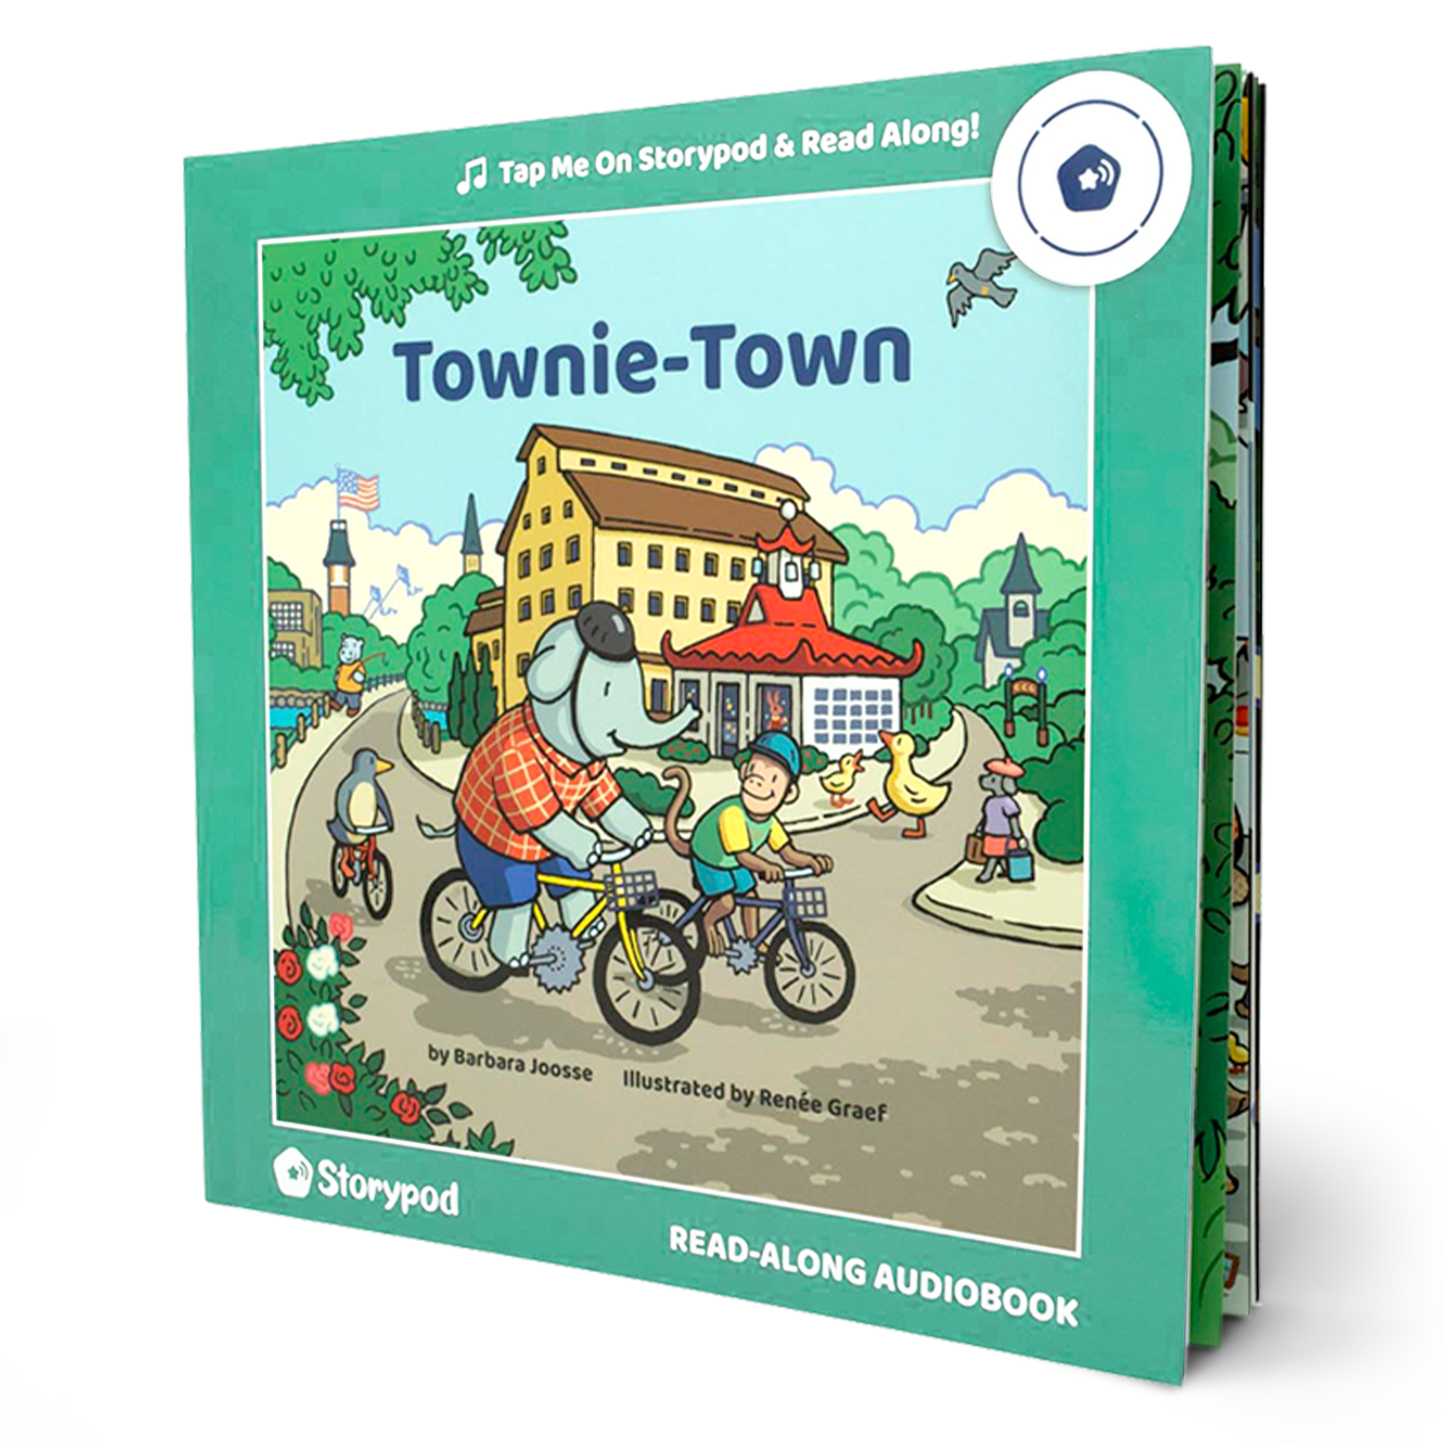 Townie-Town